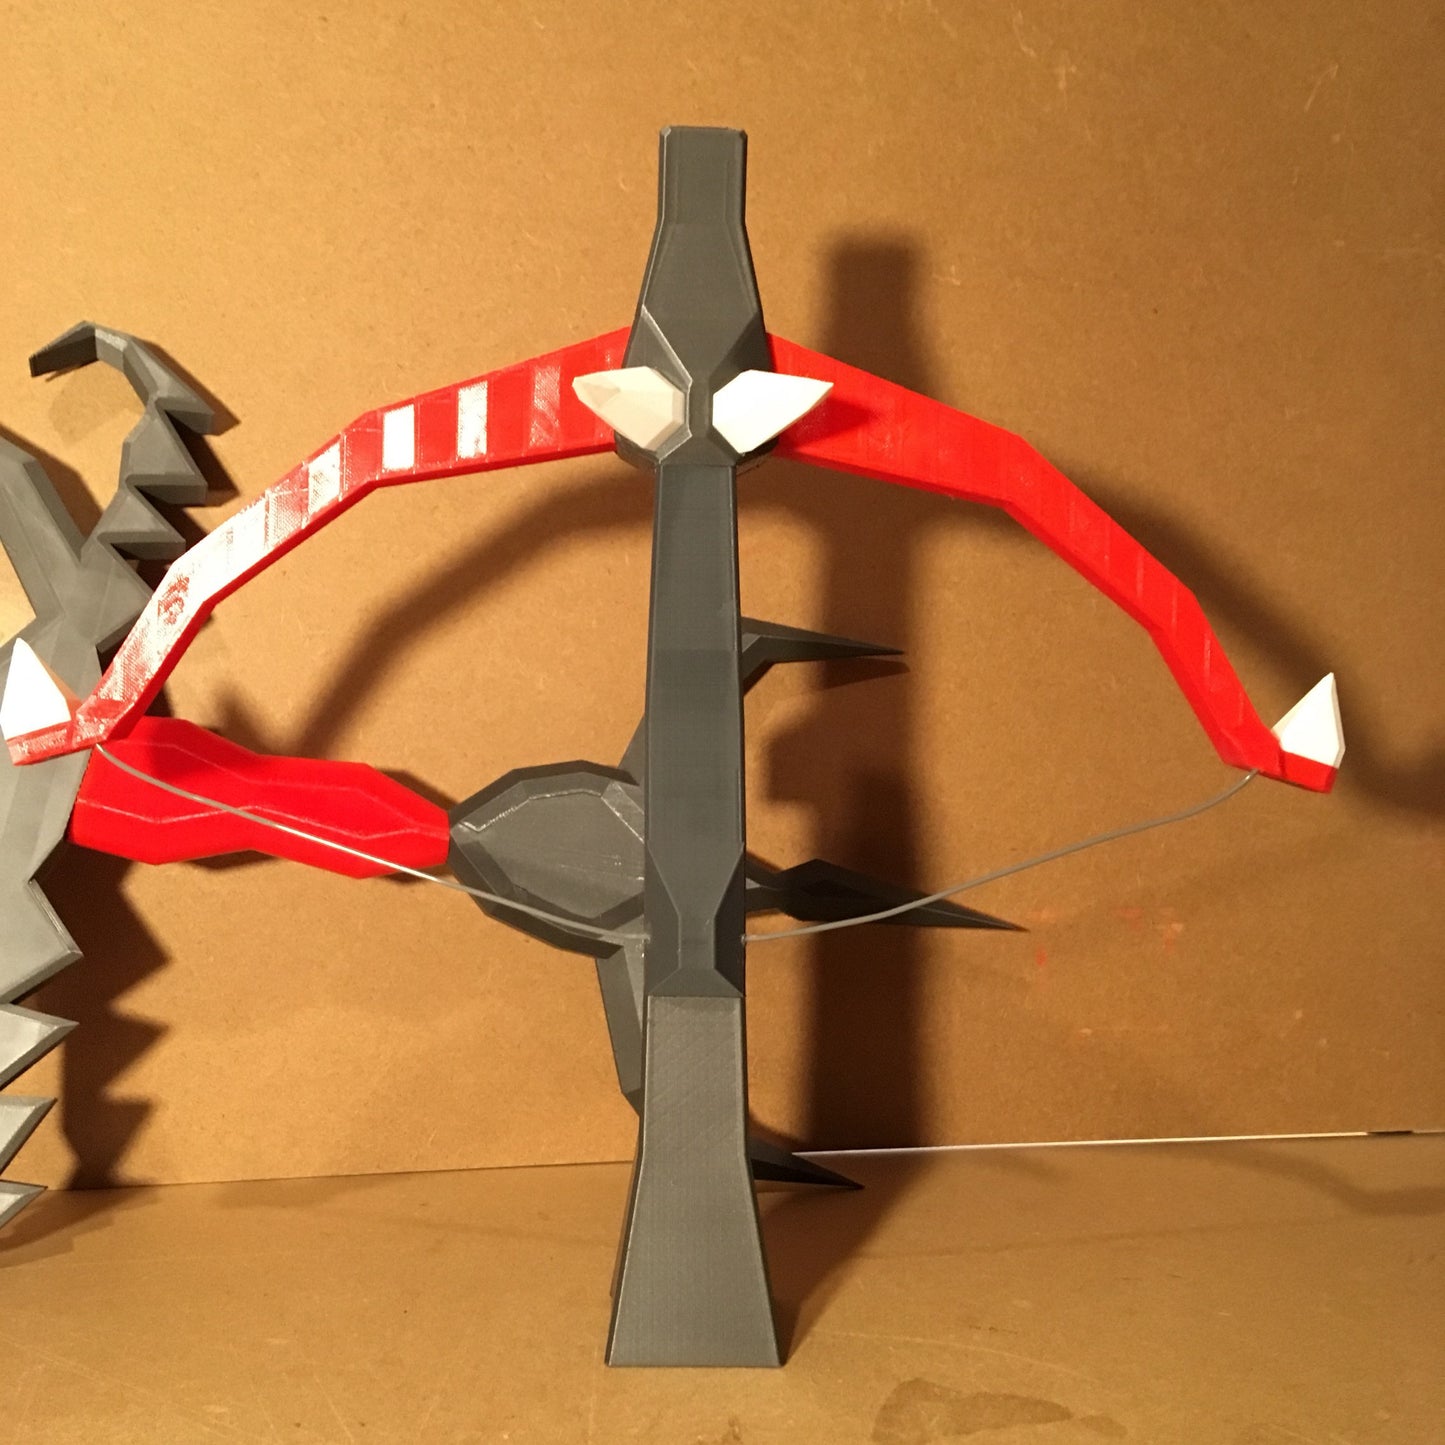 DRAGON HUNTER Crossbow / OSRS Style Weapon / Life Size Scale Runescape Weapon / Ranger Xbow / Prop / rpg Costume